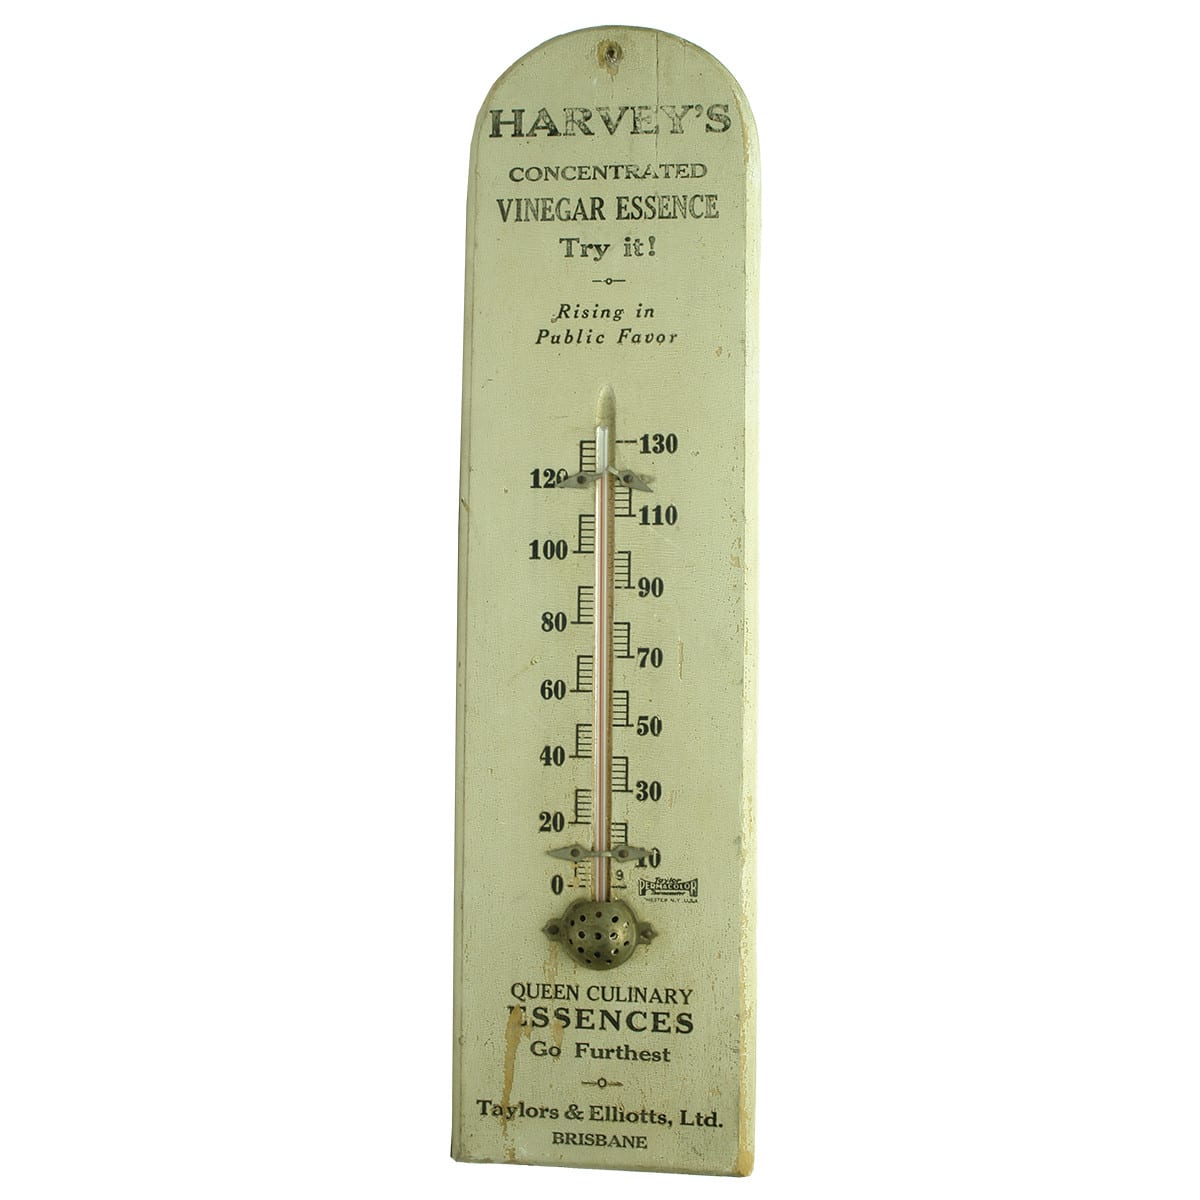 Thermometer. Harvey's Concentrated Vinegar Essence. Queen Culinary Essences. Taylors & Elliotts Ltd., Brisbane. (Queensland)